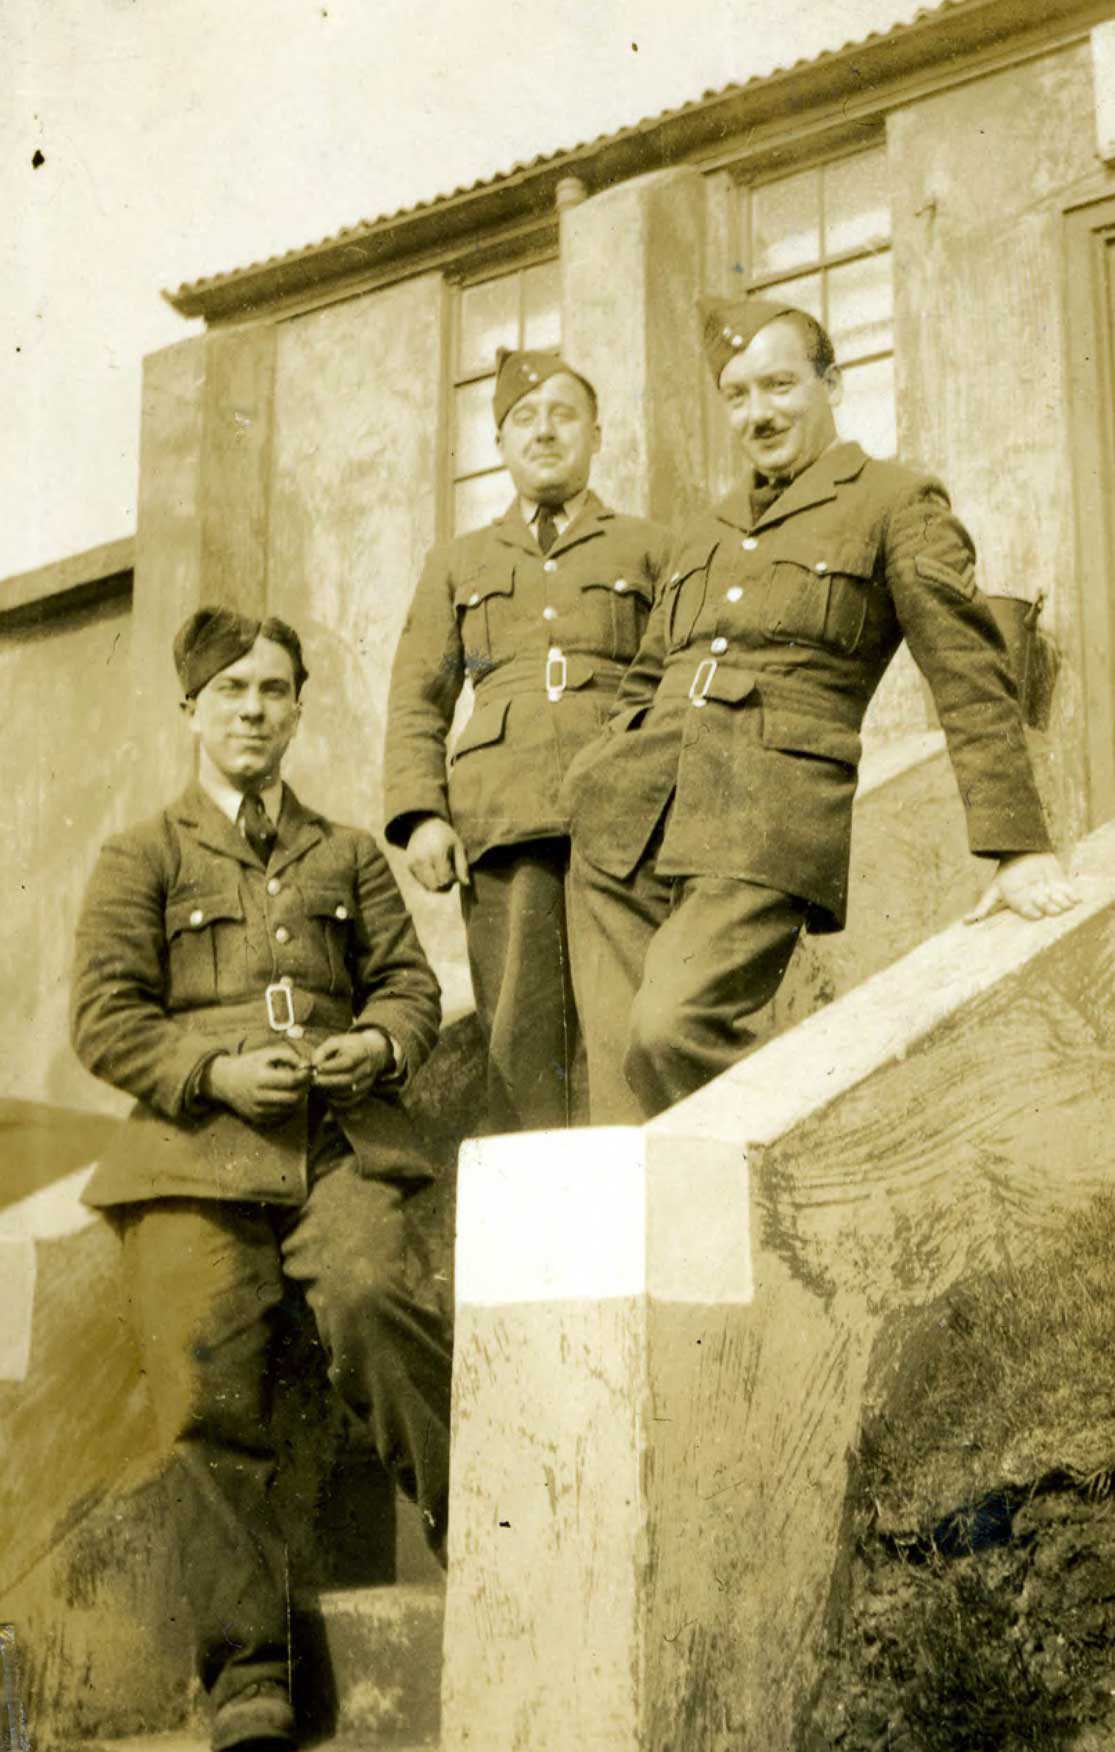 Black and white photograph of three men stood on some steps.